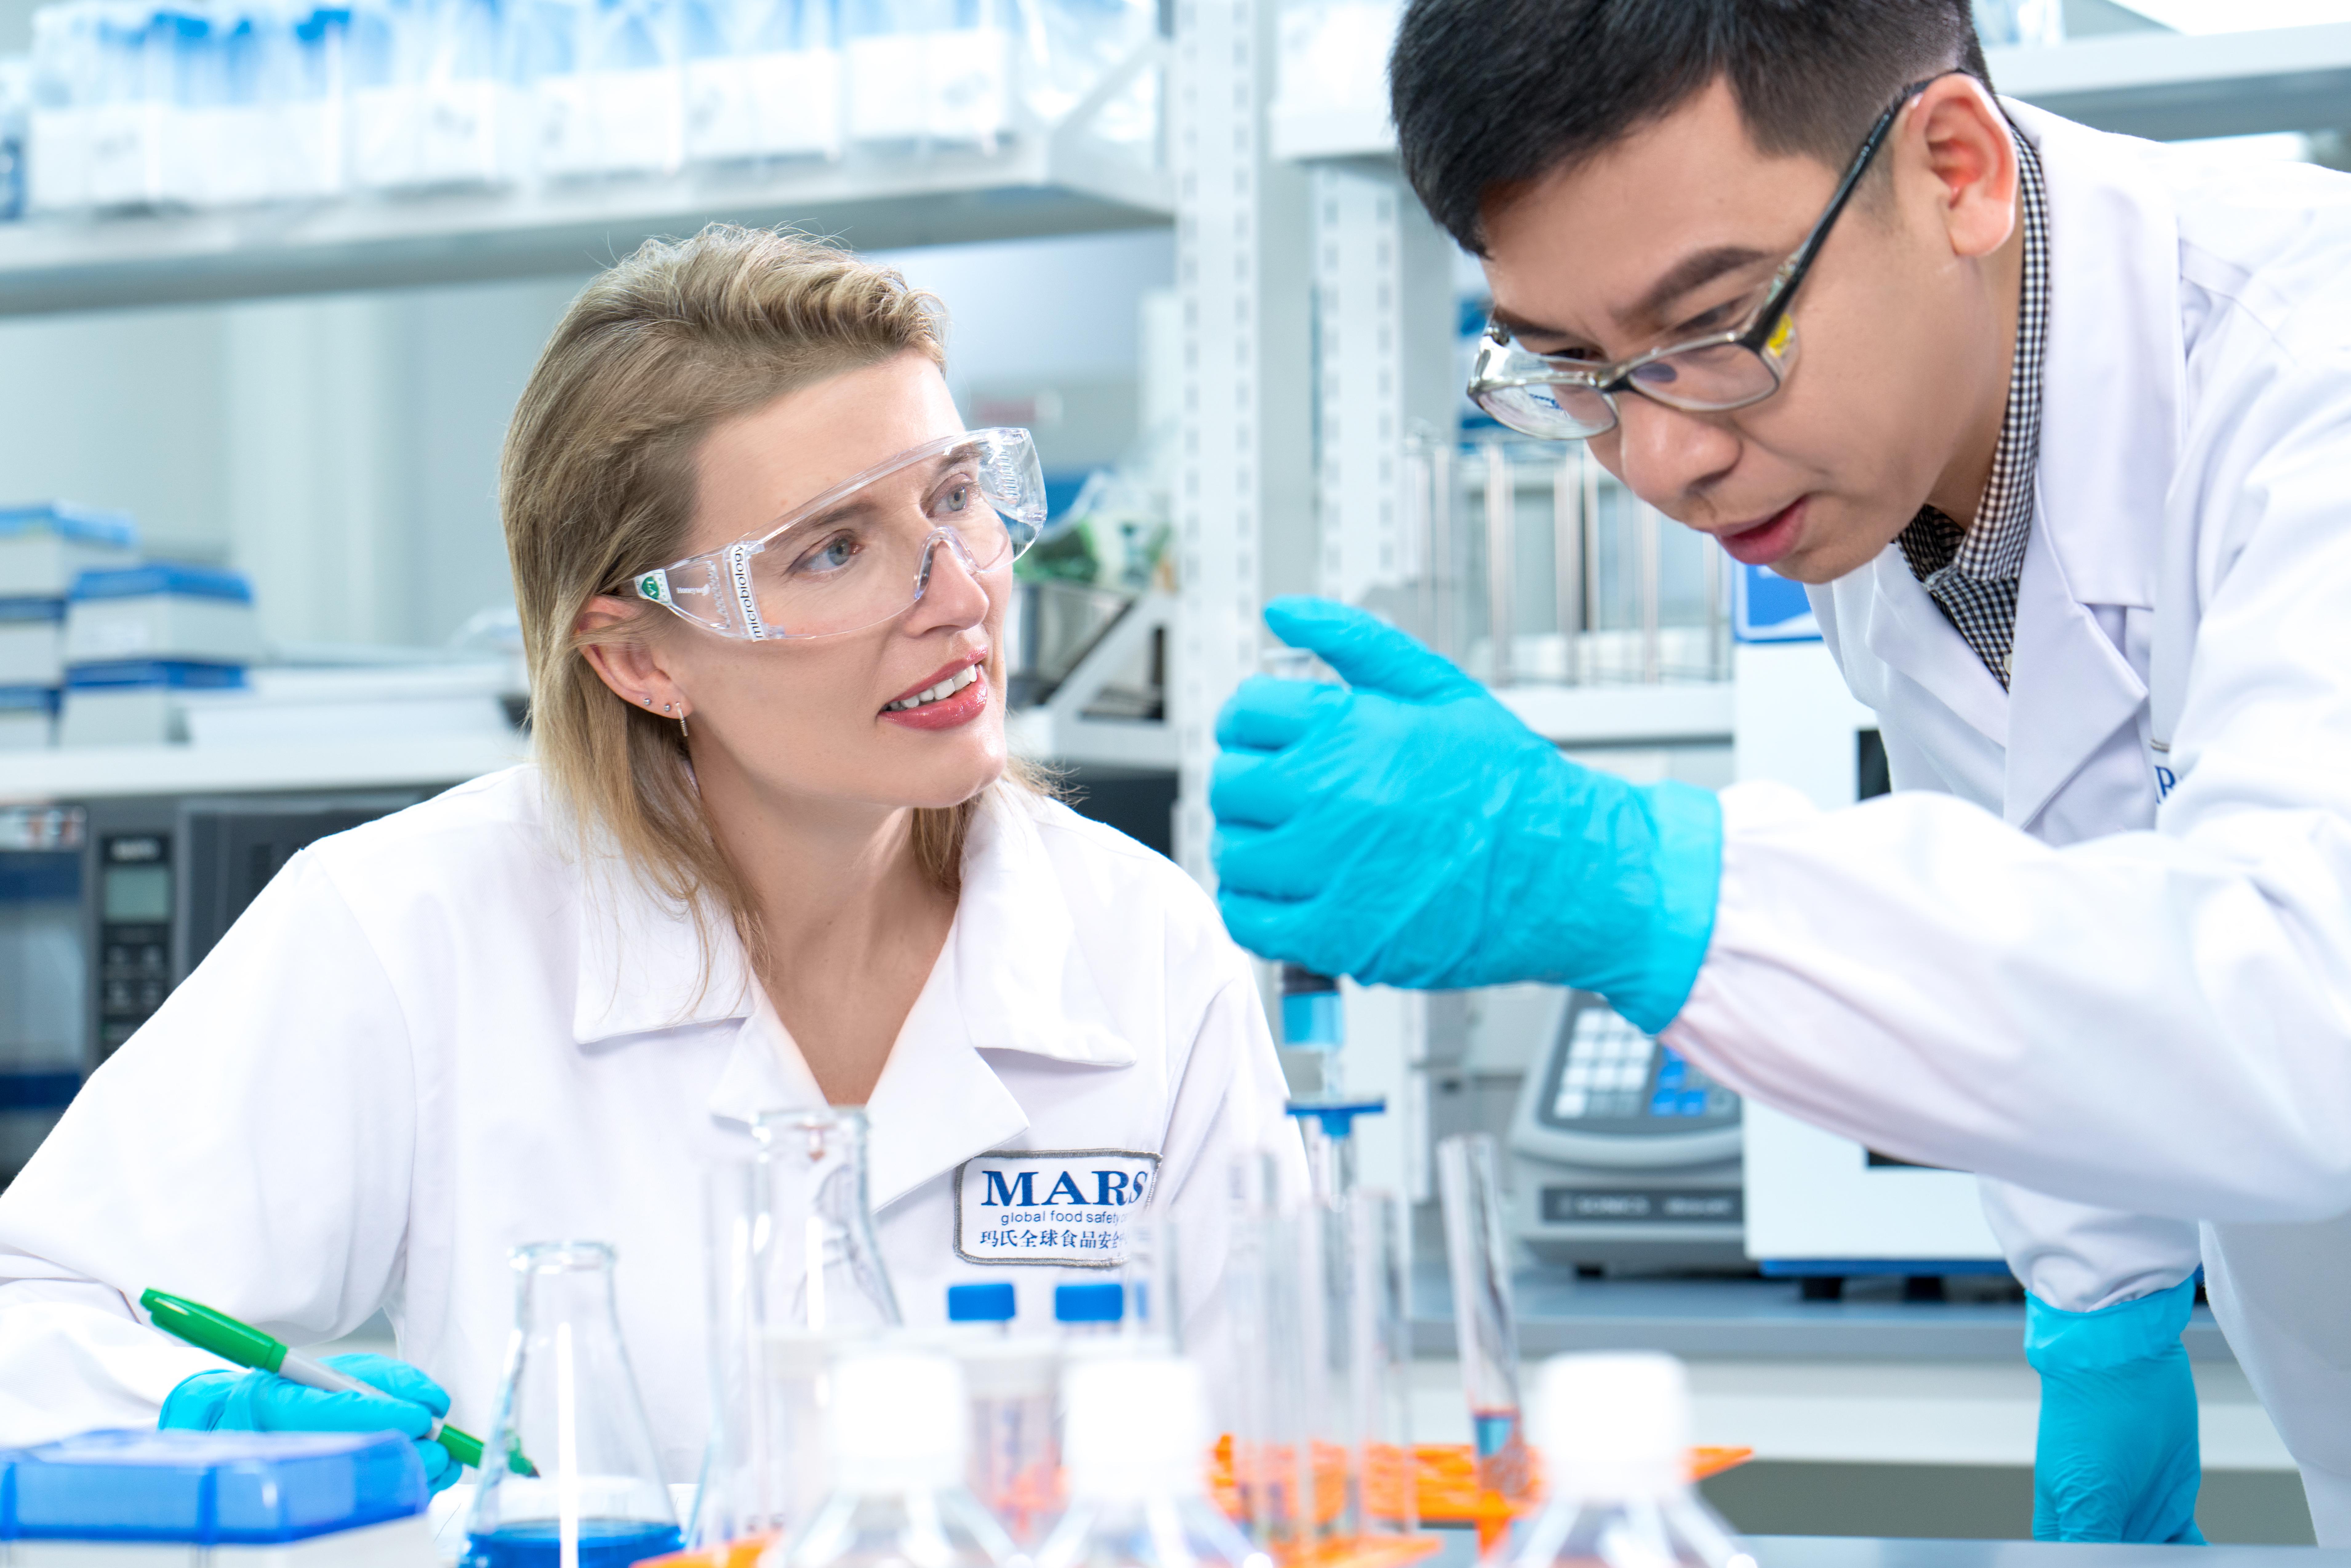 Guangtao and Abi in lab